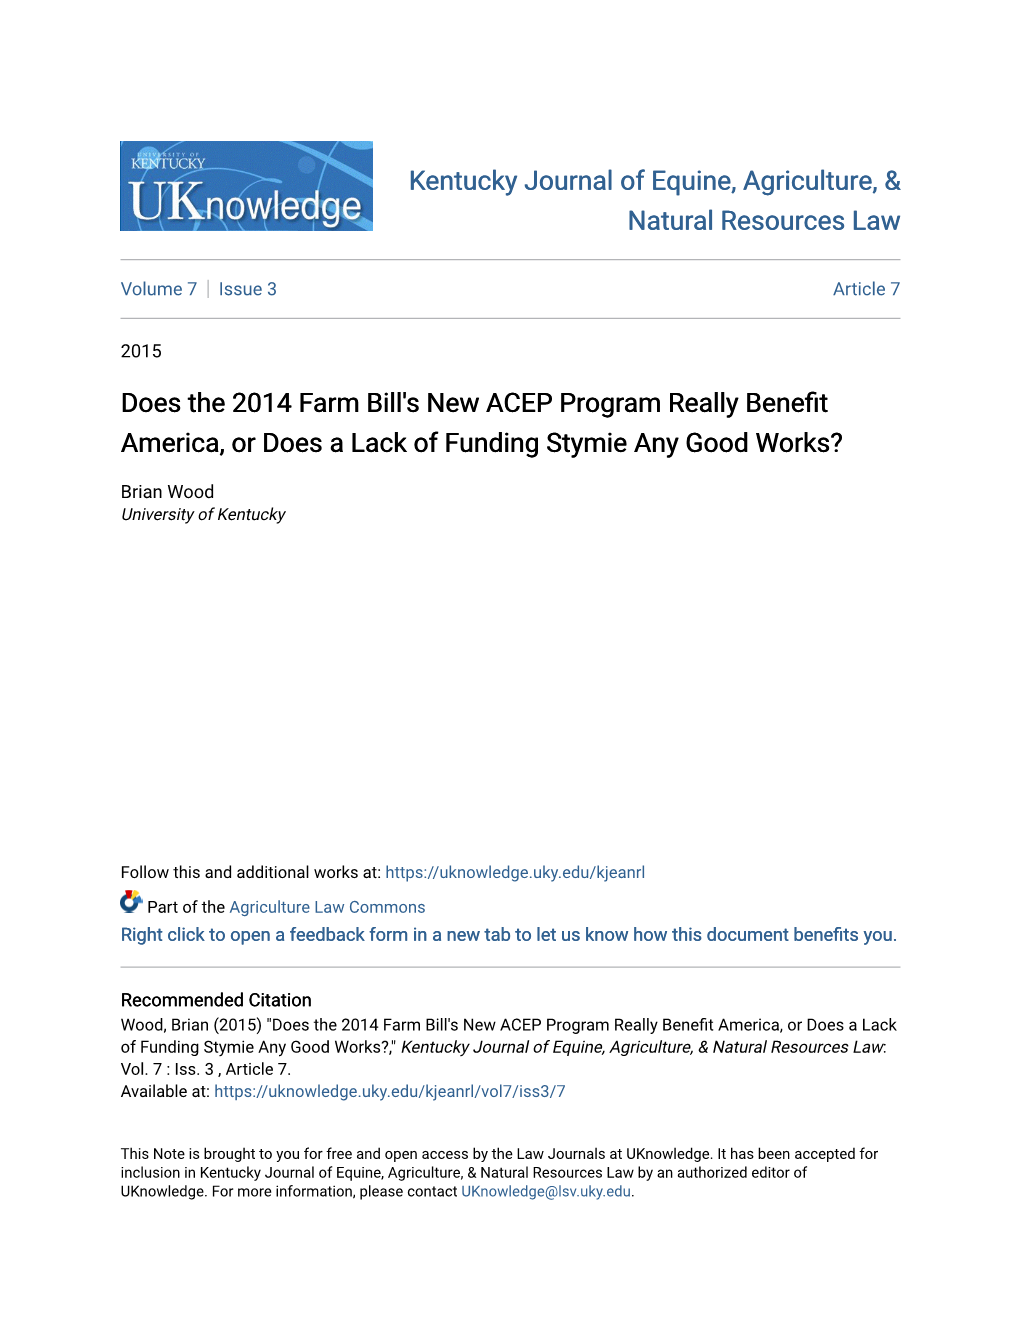 Does the 2014 Farm Bill's New ACEP Program Really Benefit America, Or Does a Lack of Funding Stymie Any Good Works?